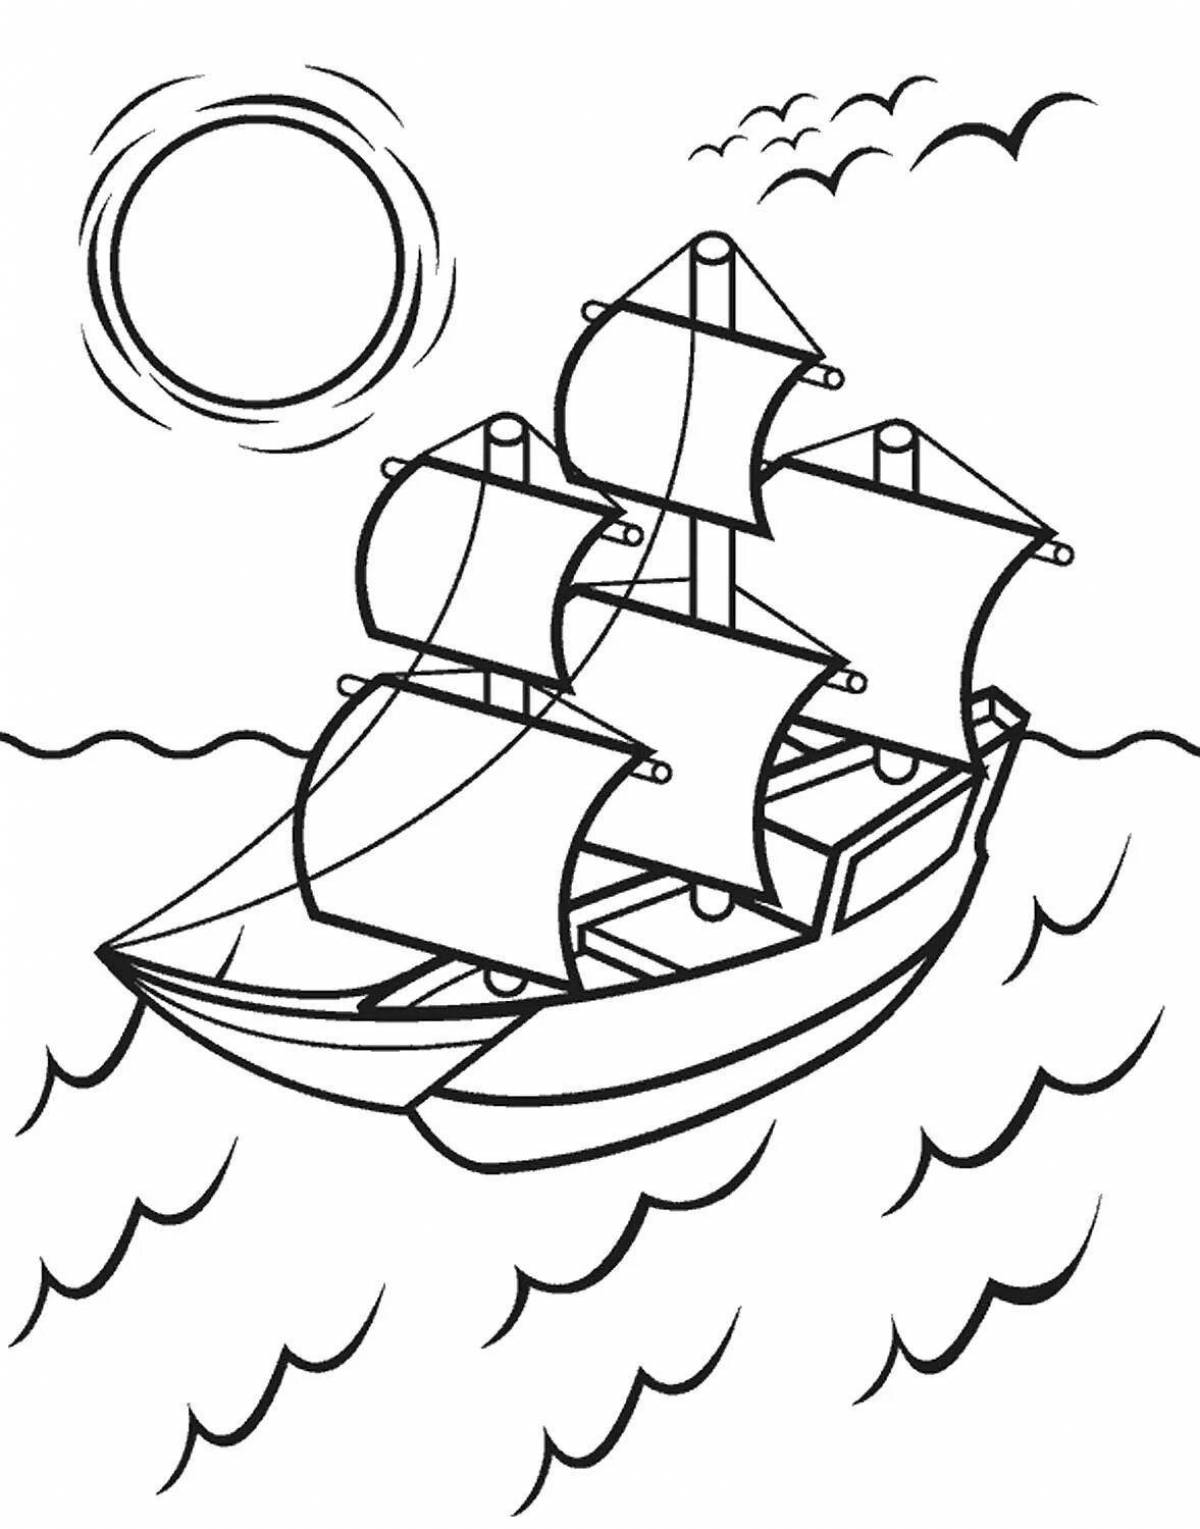 Impressive ship coloring pages for boys